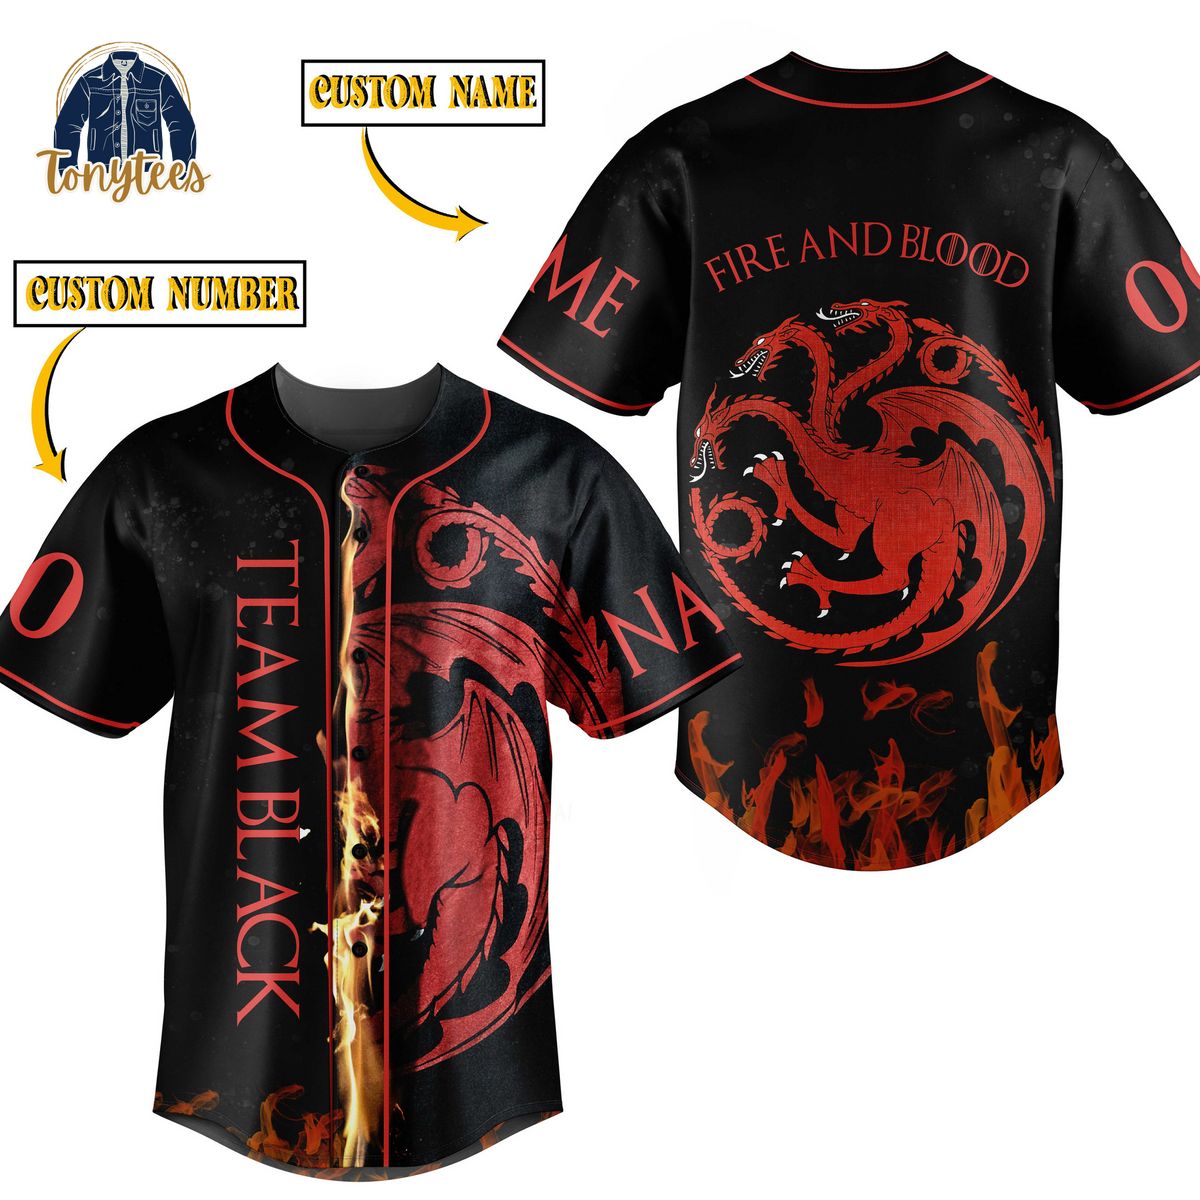 Fire And Blood team back personalized baseball jersey